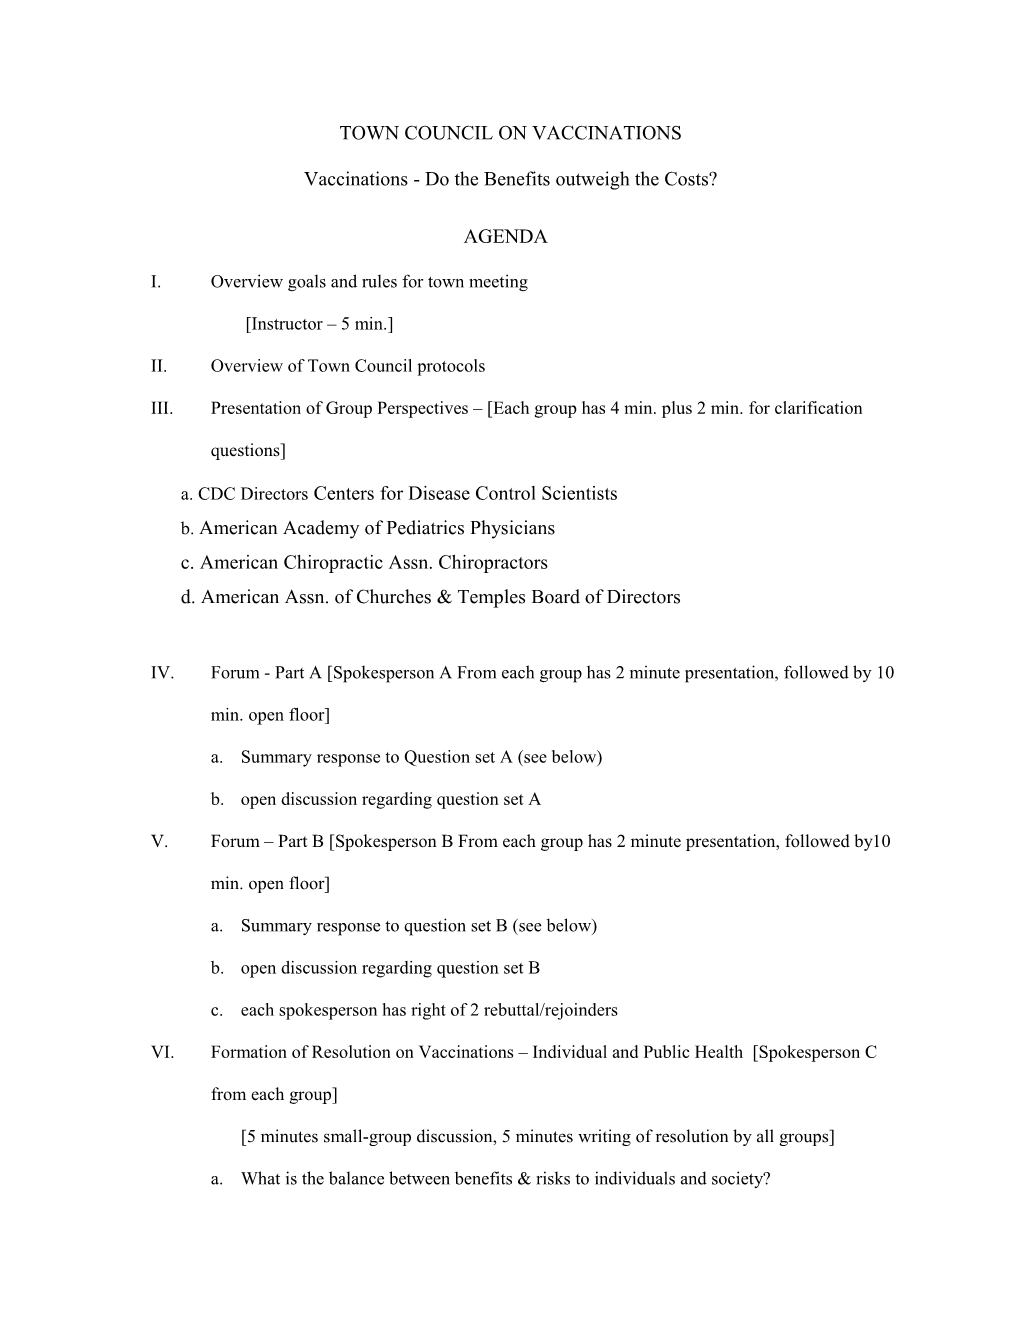 Town Council Agenda For